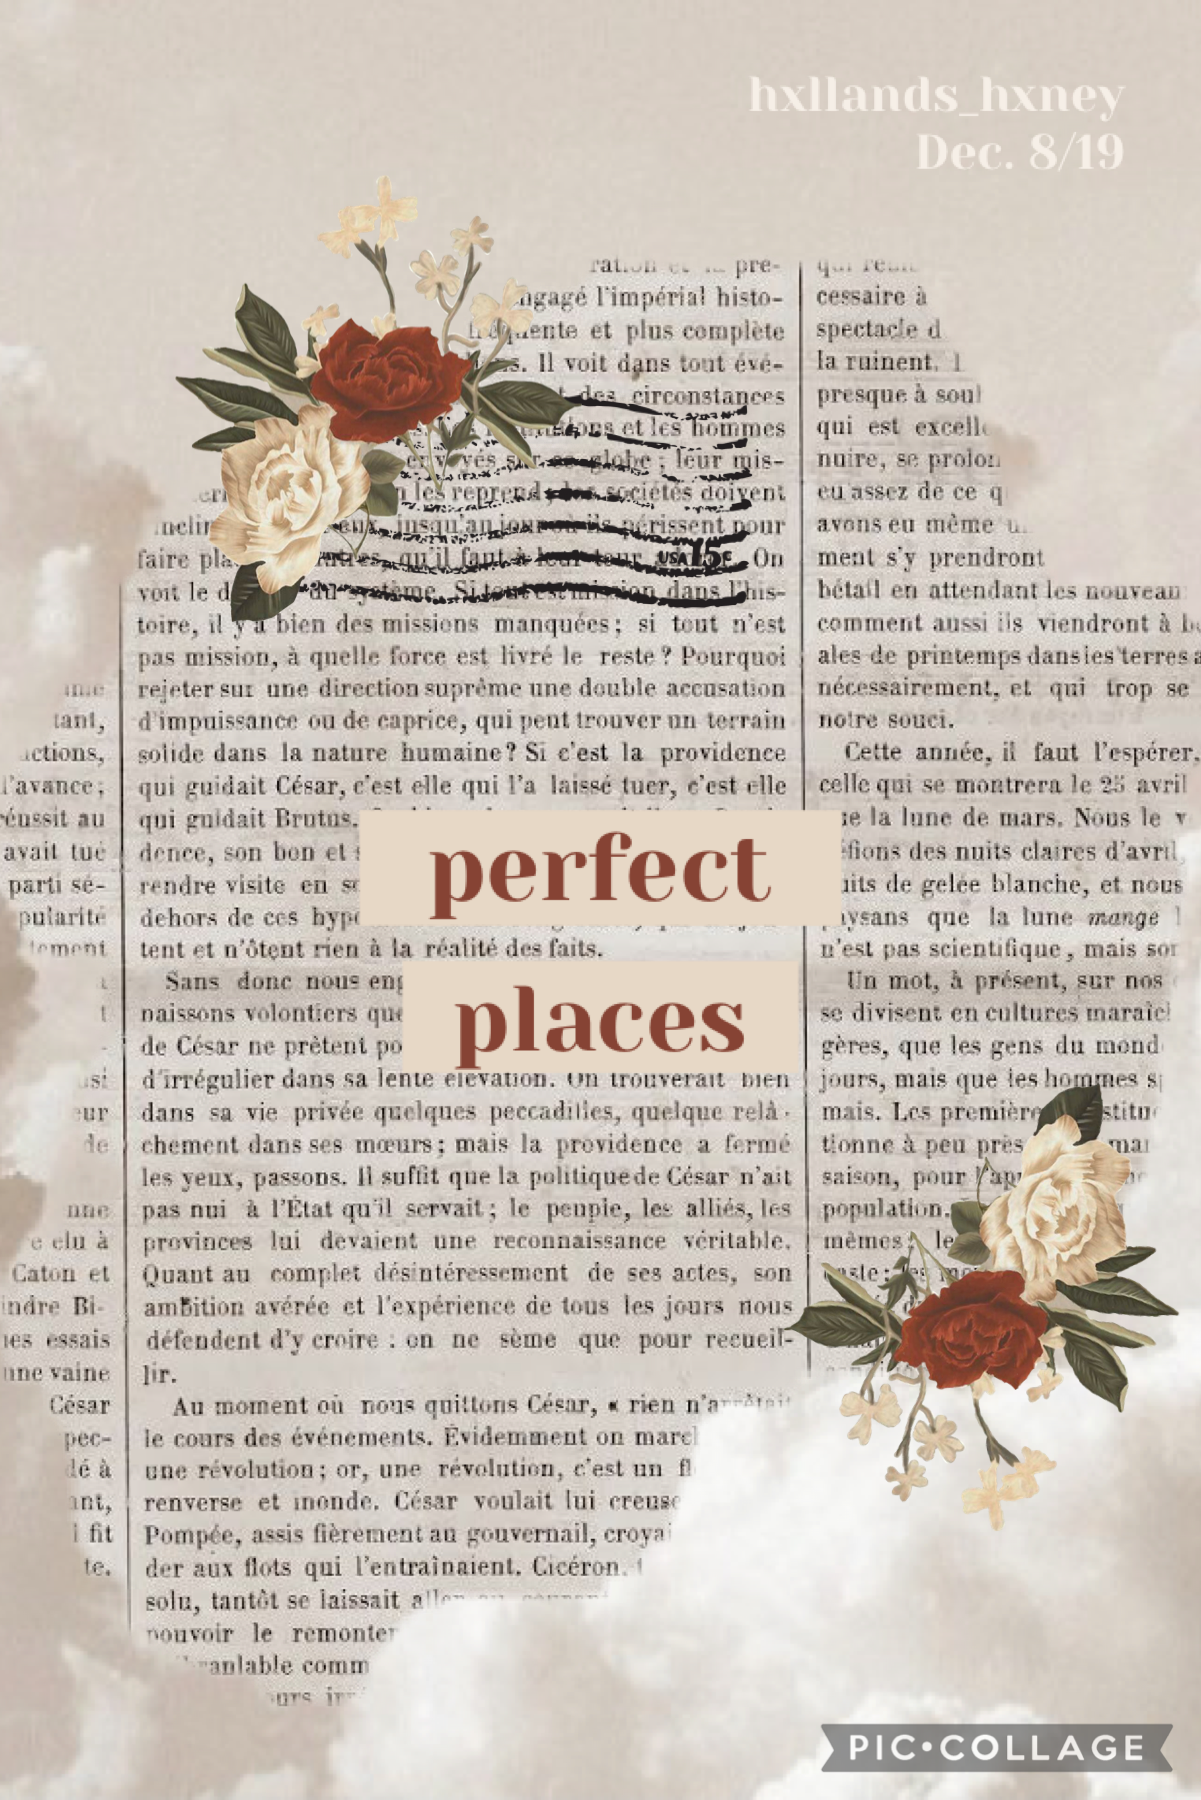 Go read perfect places on AO3 and Wattpad @hxllands_hxney!